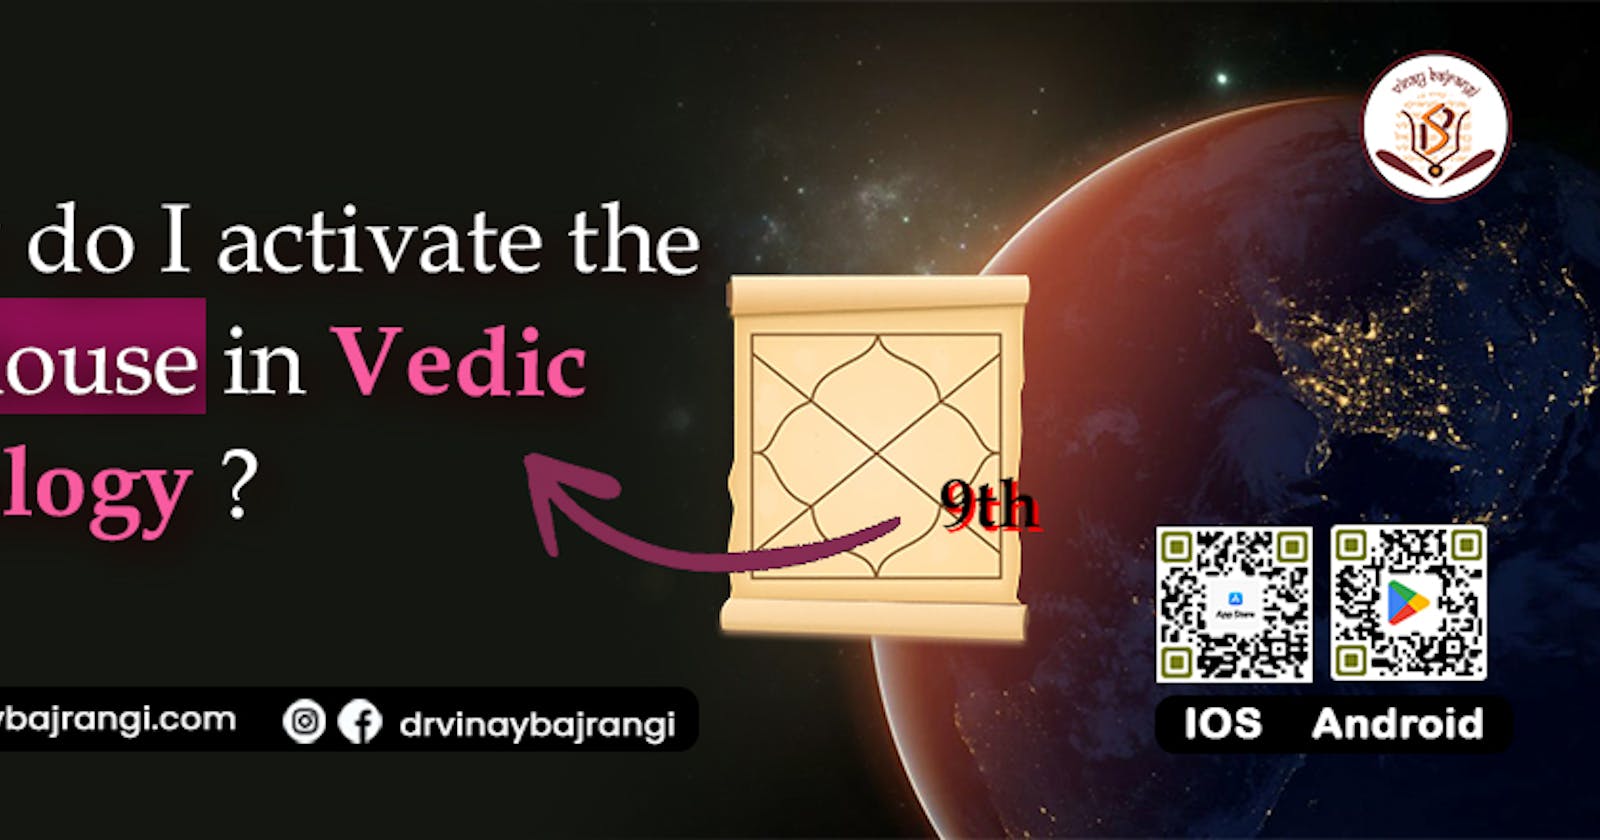 How do I activate the 9th house in Vedic astrology